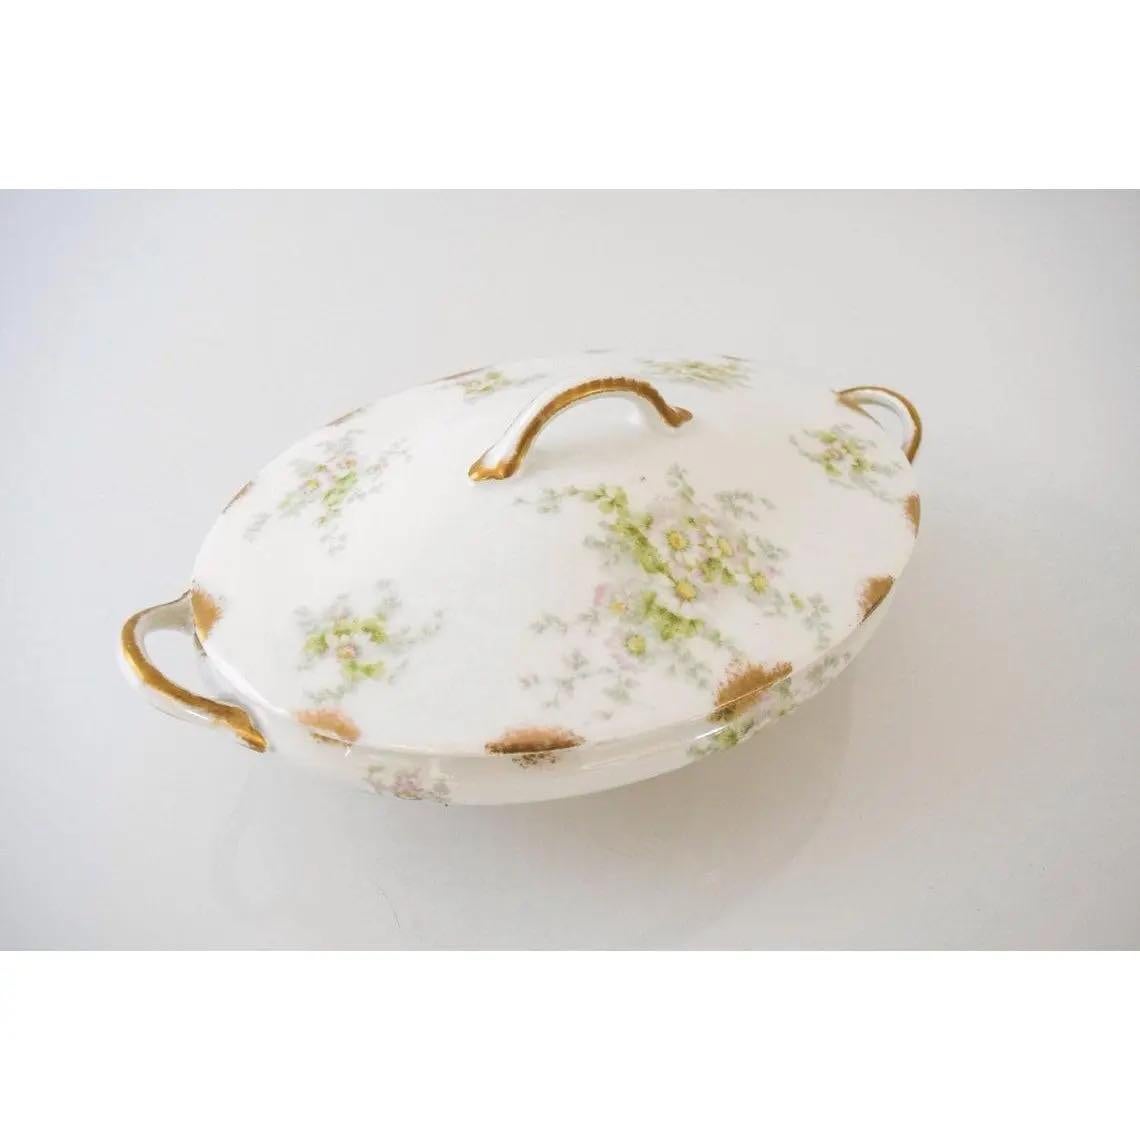 This lovely vintage antique Haviland Limoges GDA France covered serving tureen or vegetable bowl is circa 1900-1941. It features a translucent white background decorated with a soft, delicate floral pattern of pale green leaves and vines and pink